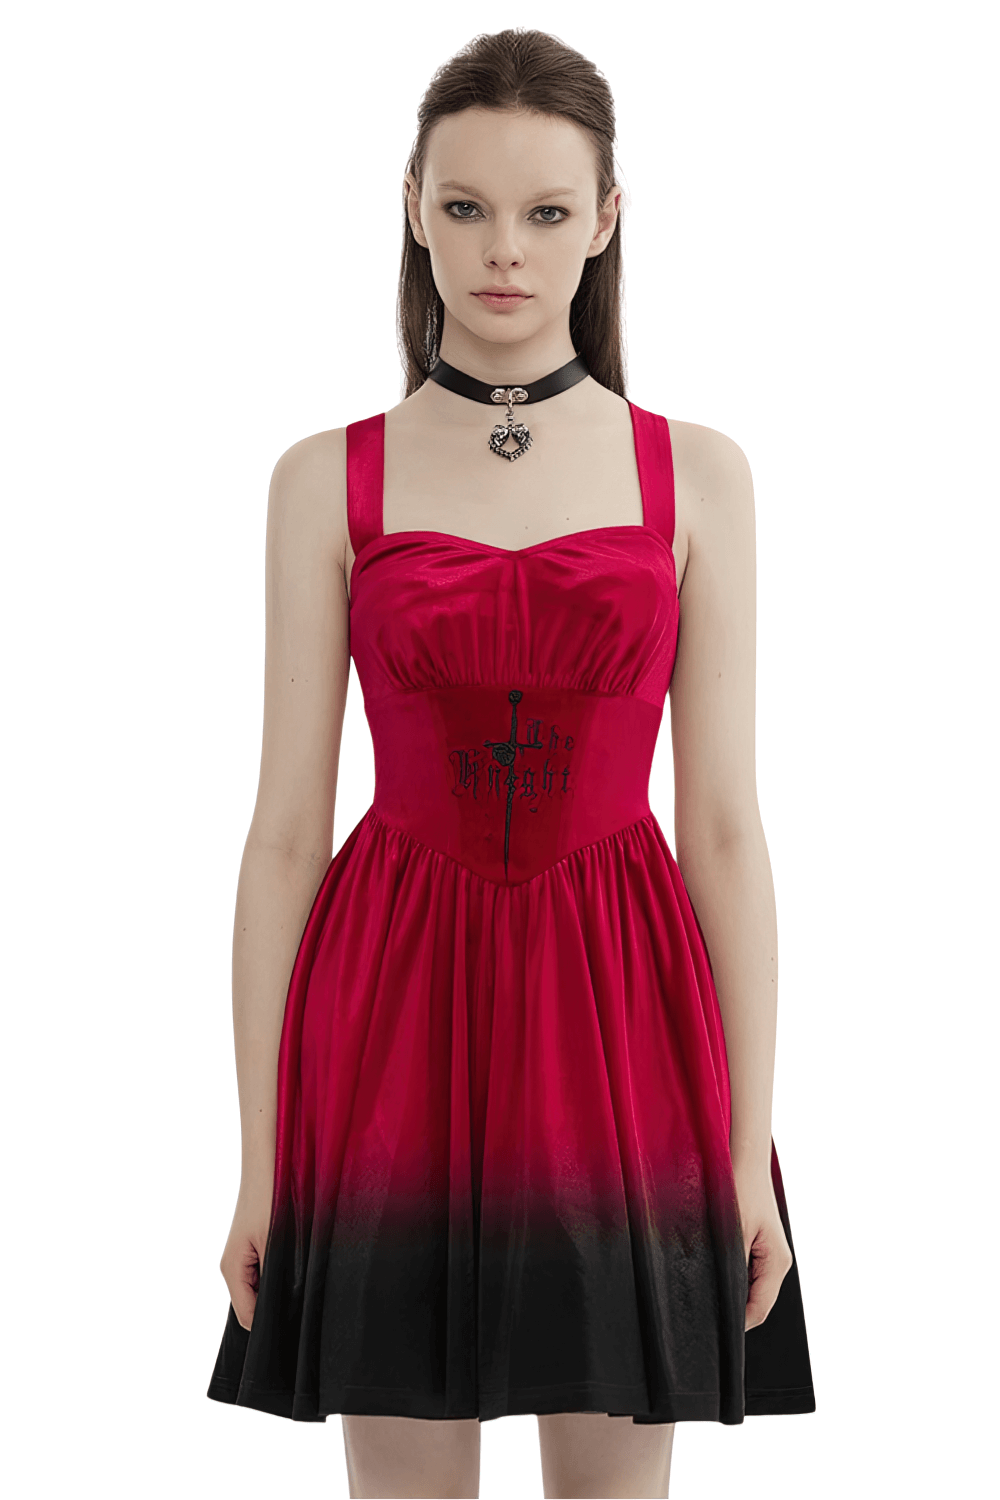 Punk Rave Red Gothic The Knight Embroidered Velvet Dress